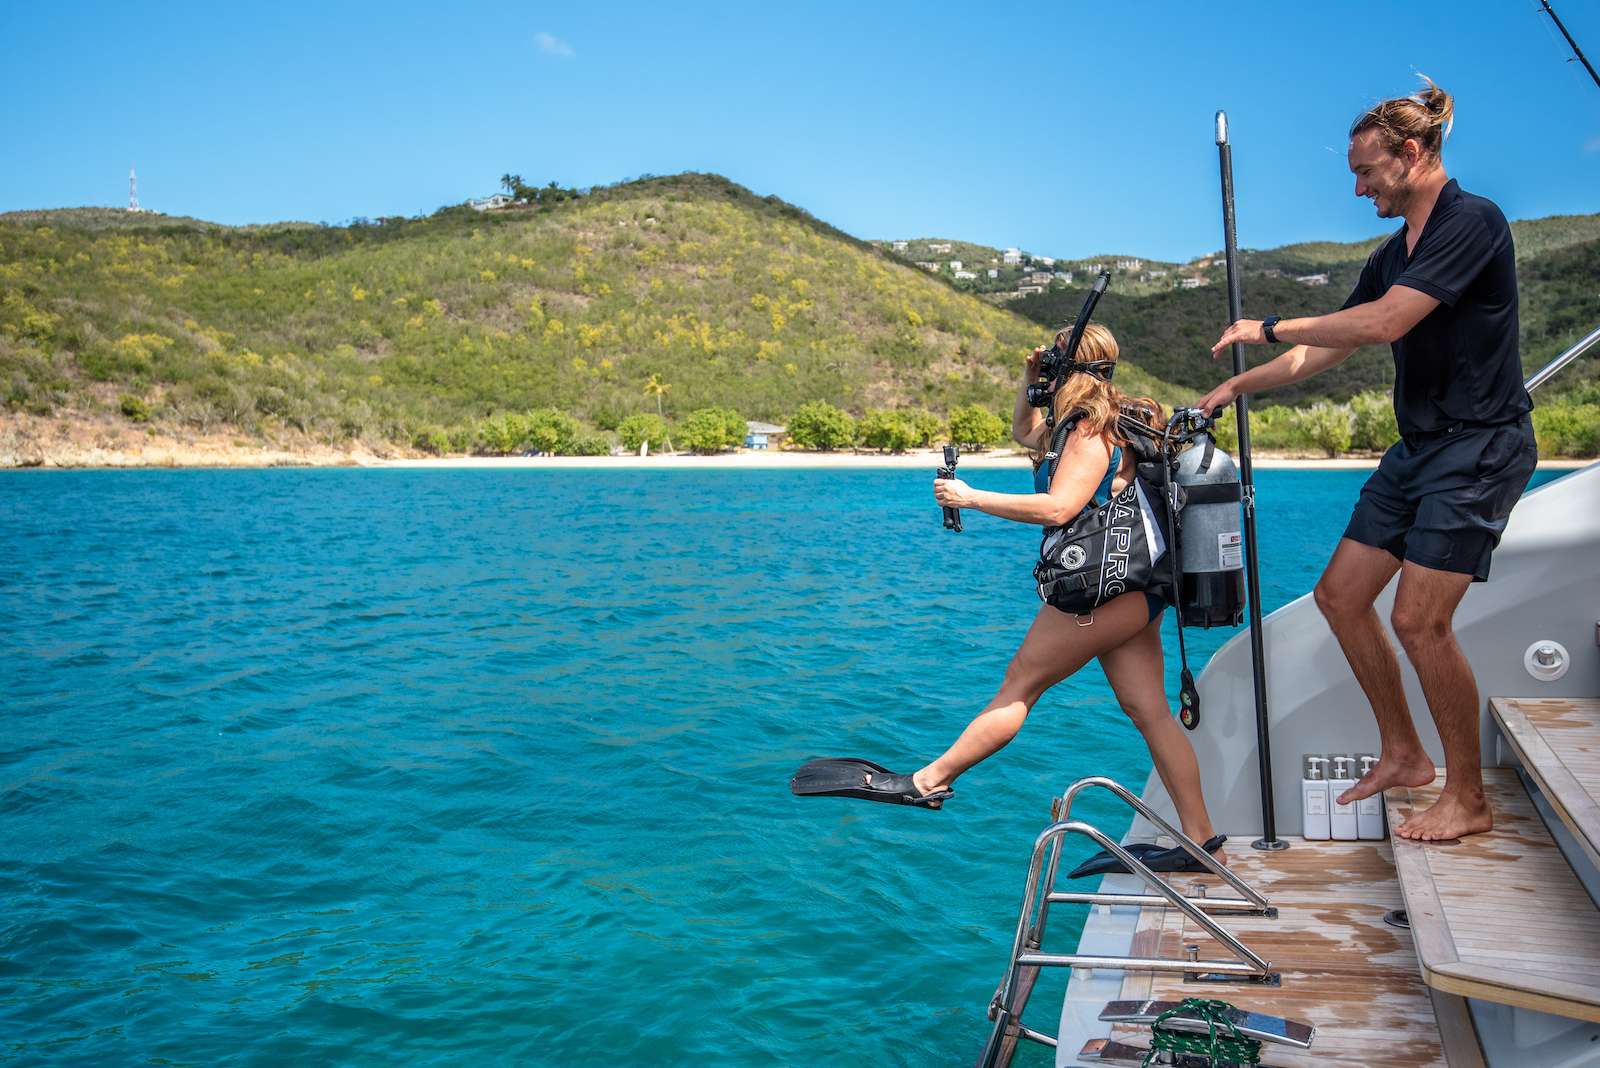 XANDROS Yacht Charter - The BEST way to snorkel or dive